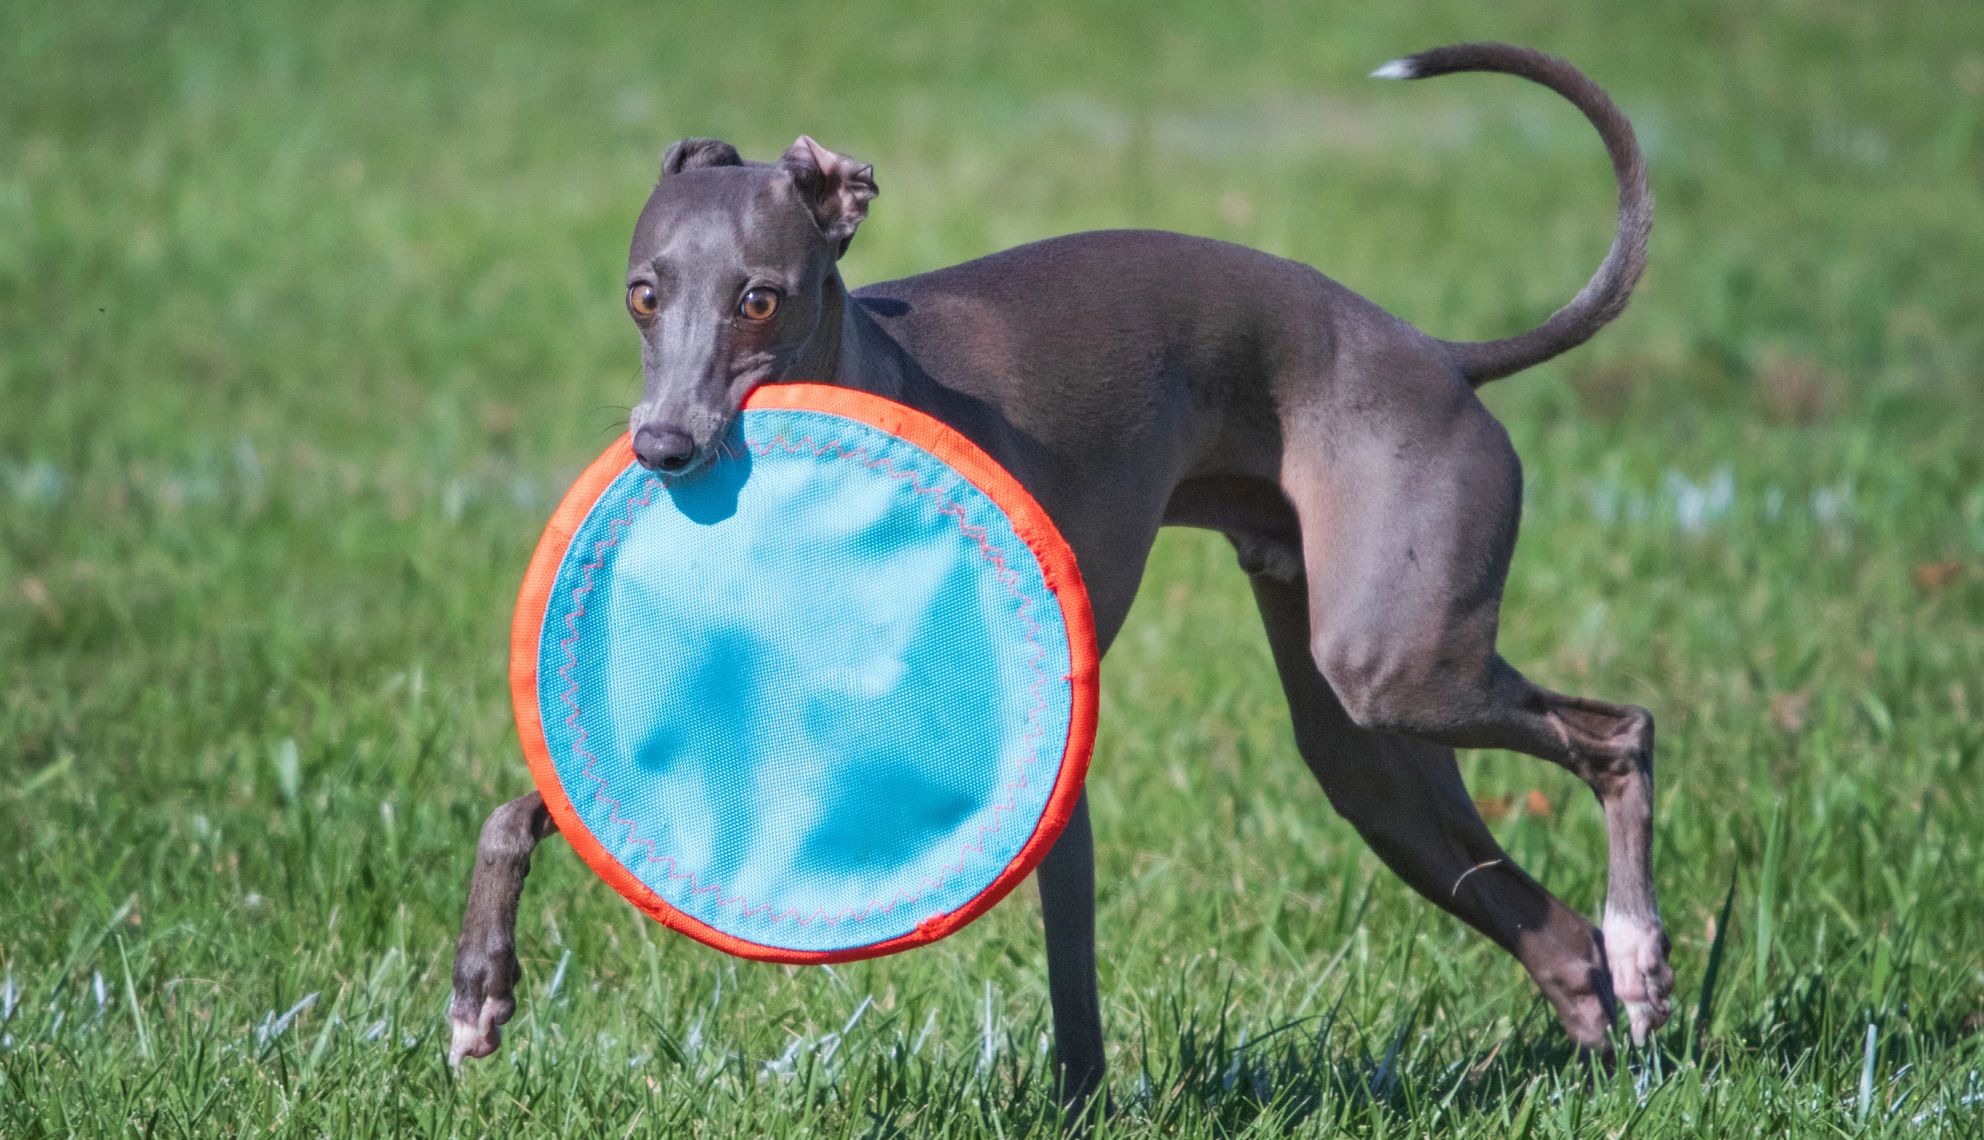 A greyhound in a park holding a blue frisbee